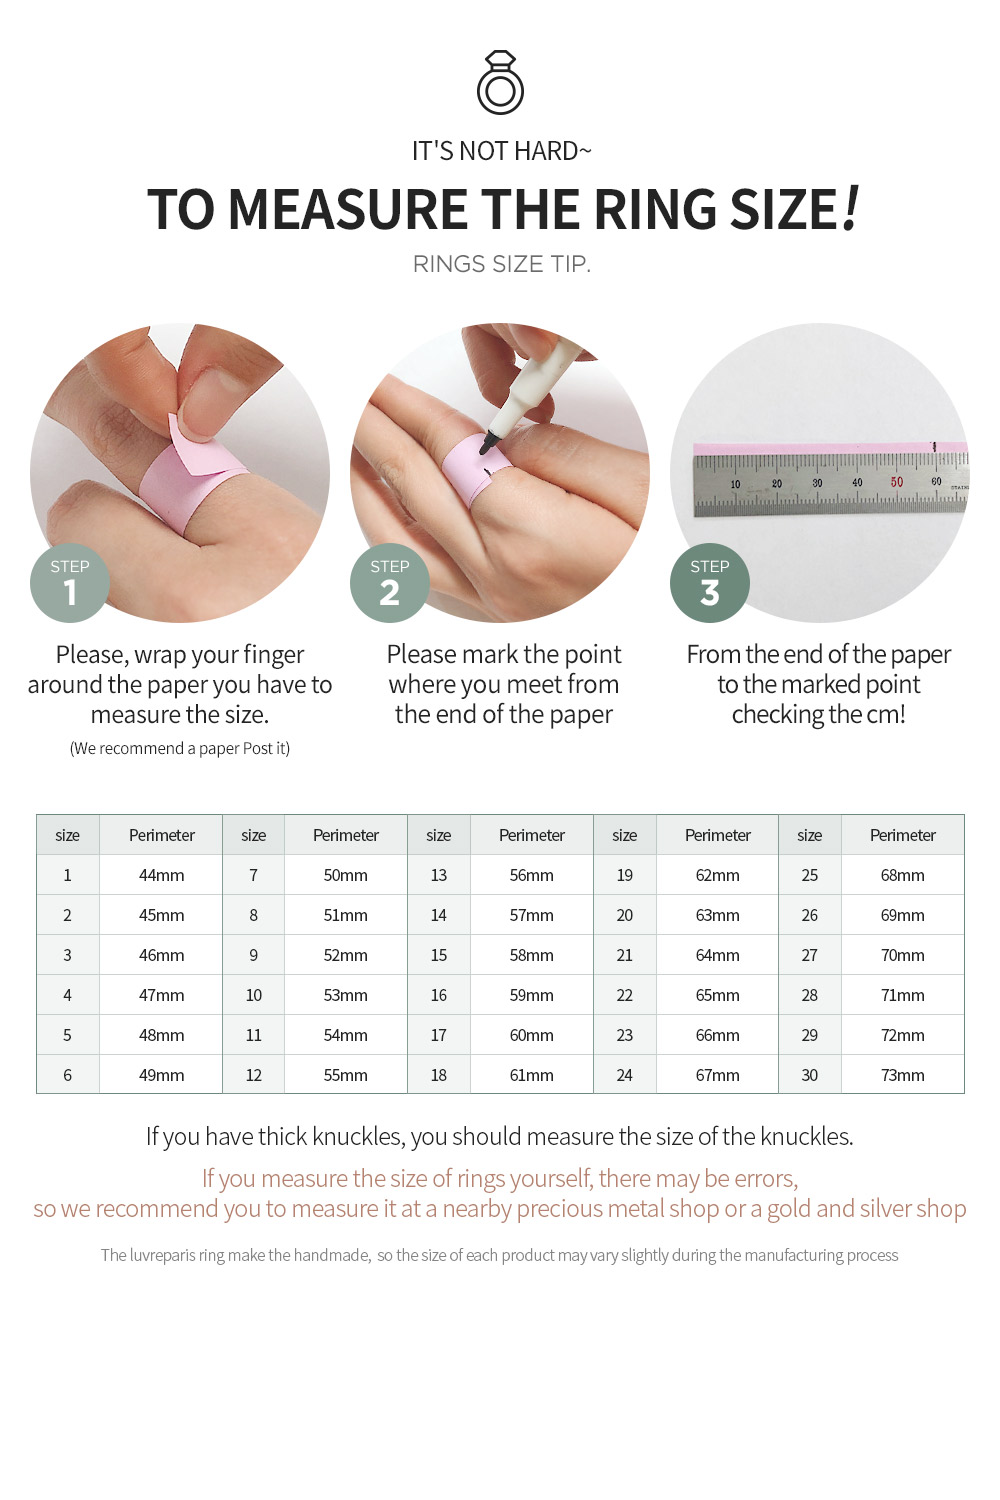 Ring size measurement info.